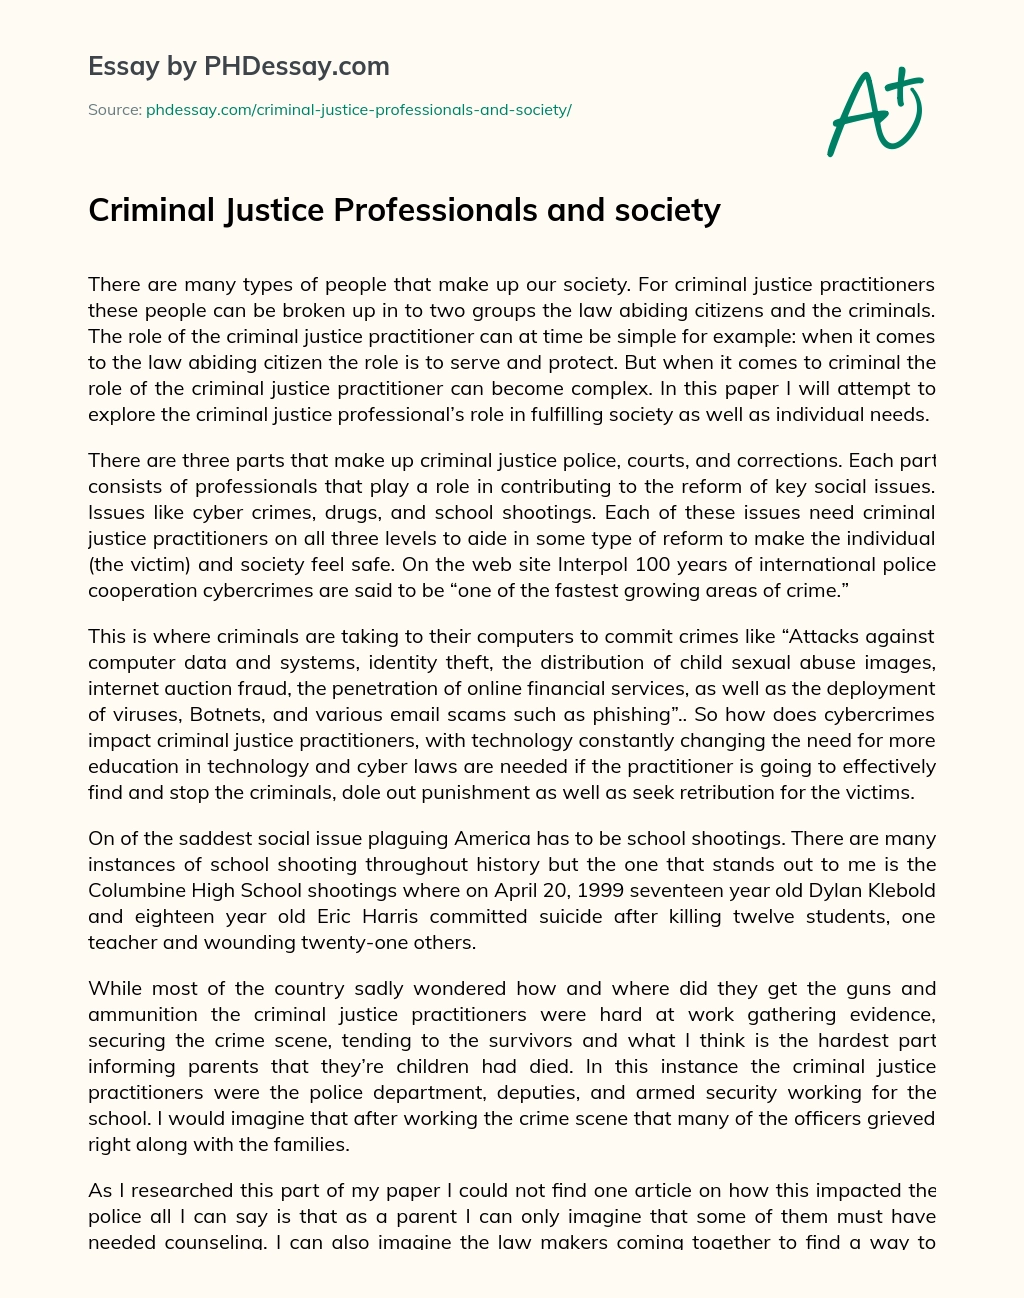 Criminal Justice Professionals and society essay